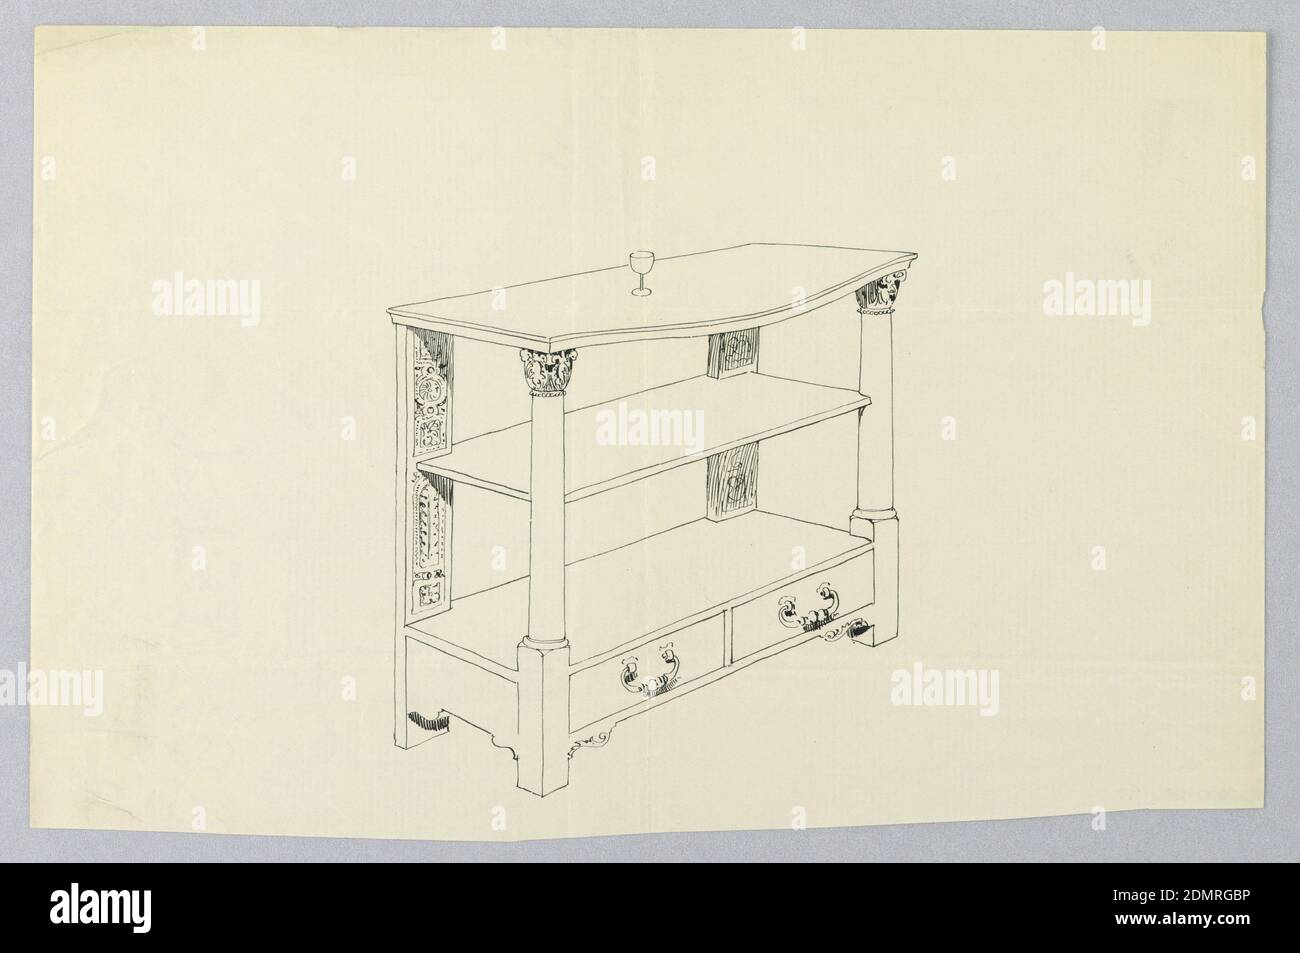 Design for Side Serving Table with two shelves adorned by two Corinthian- column front supports on a two-drawer base, A.N. Davenport Co., Pen and black ink on thin cream paper, Table with oblong top (convex front) resting on two Corinthian column front supports and two flat, ornately-carved back supports. Shelf unit in middle. Base is made up of two drawers (a unit on short legs so it is raised off the floor). A wine glass stands atop the table., 1900–05, furniture, Drawing Stock Photo